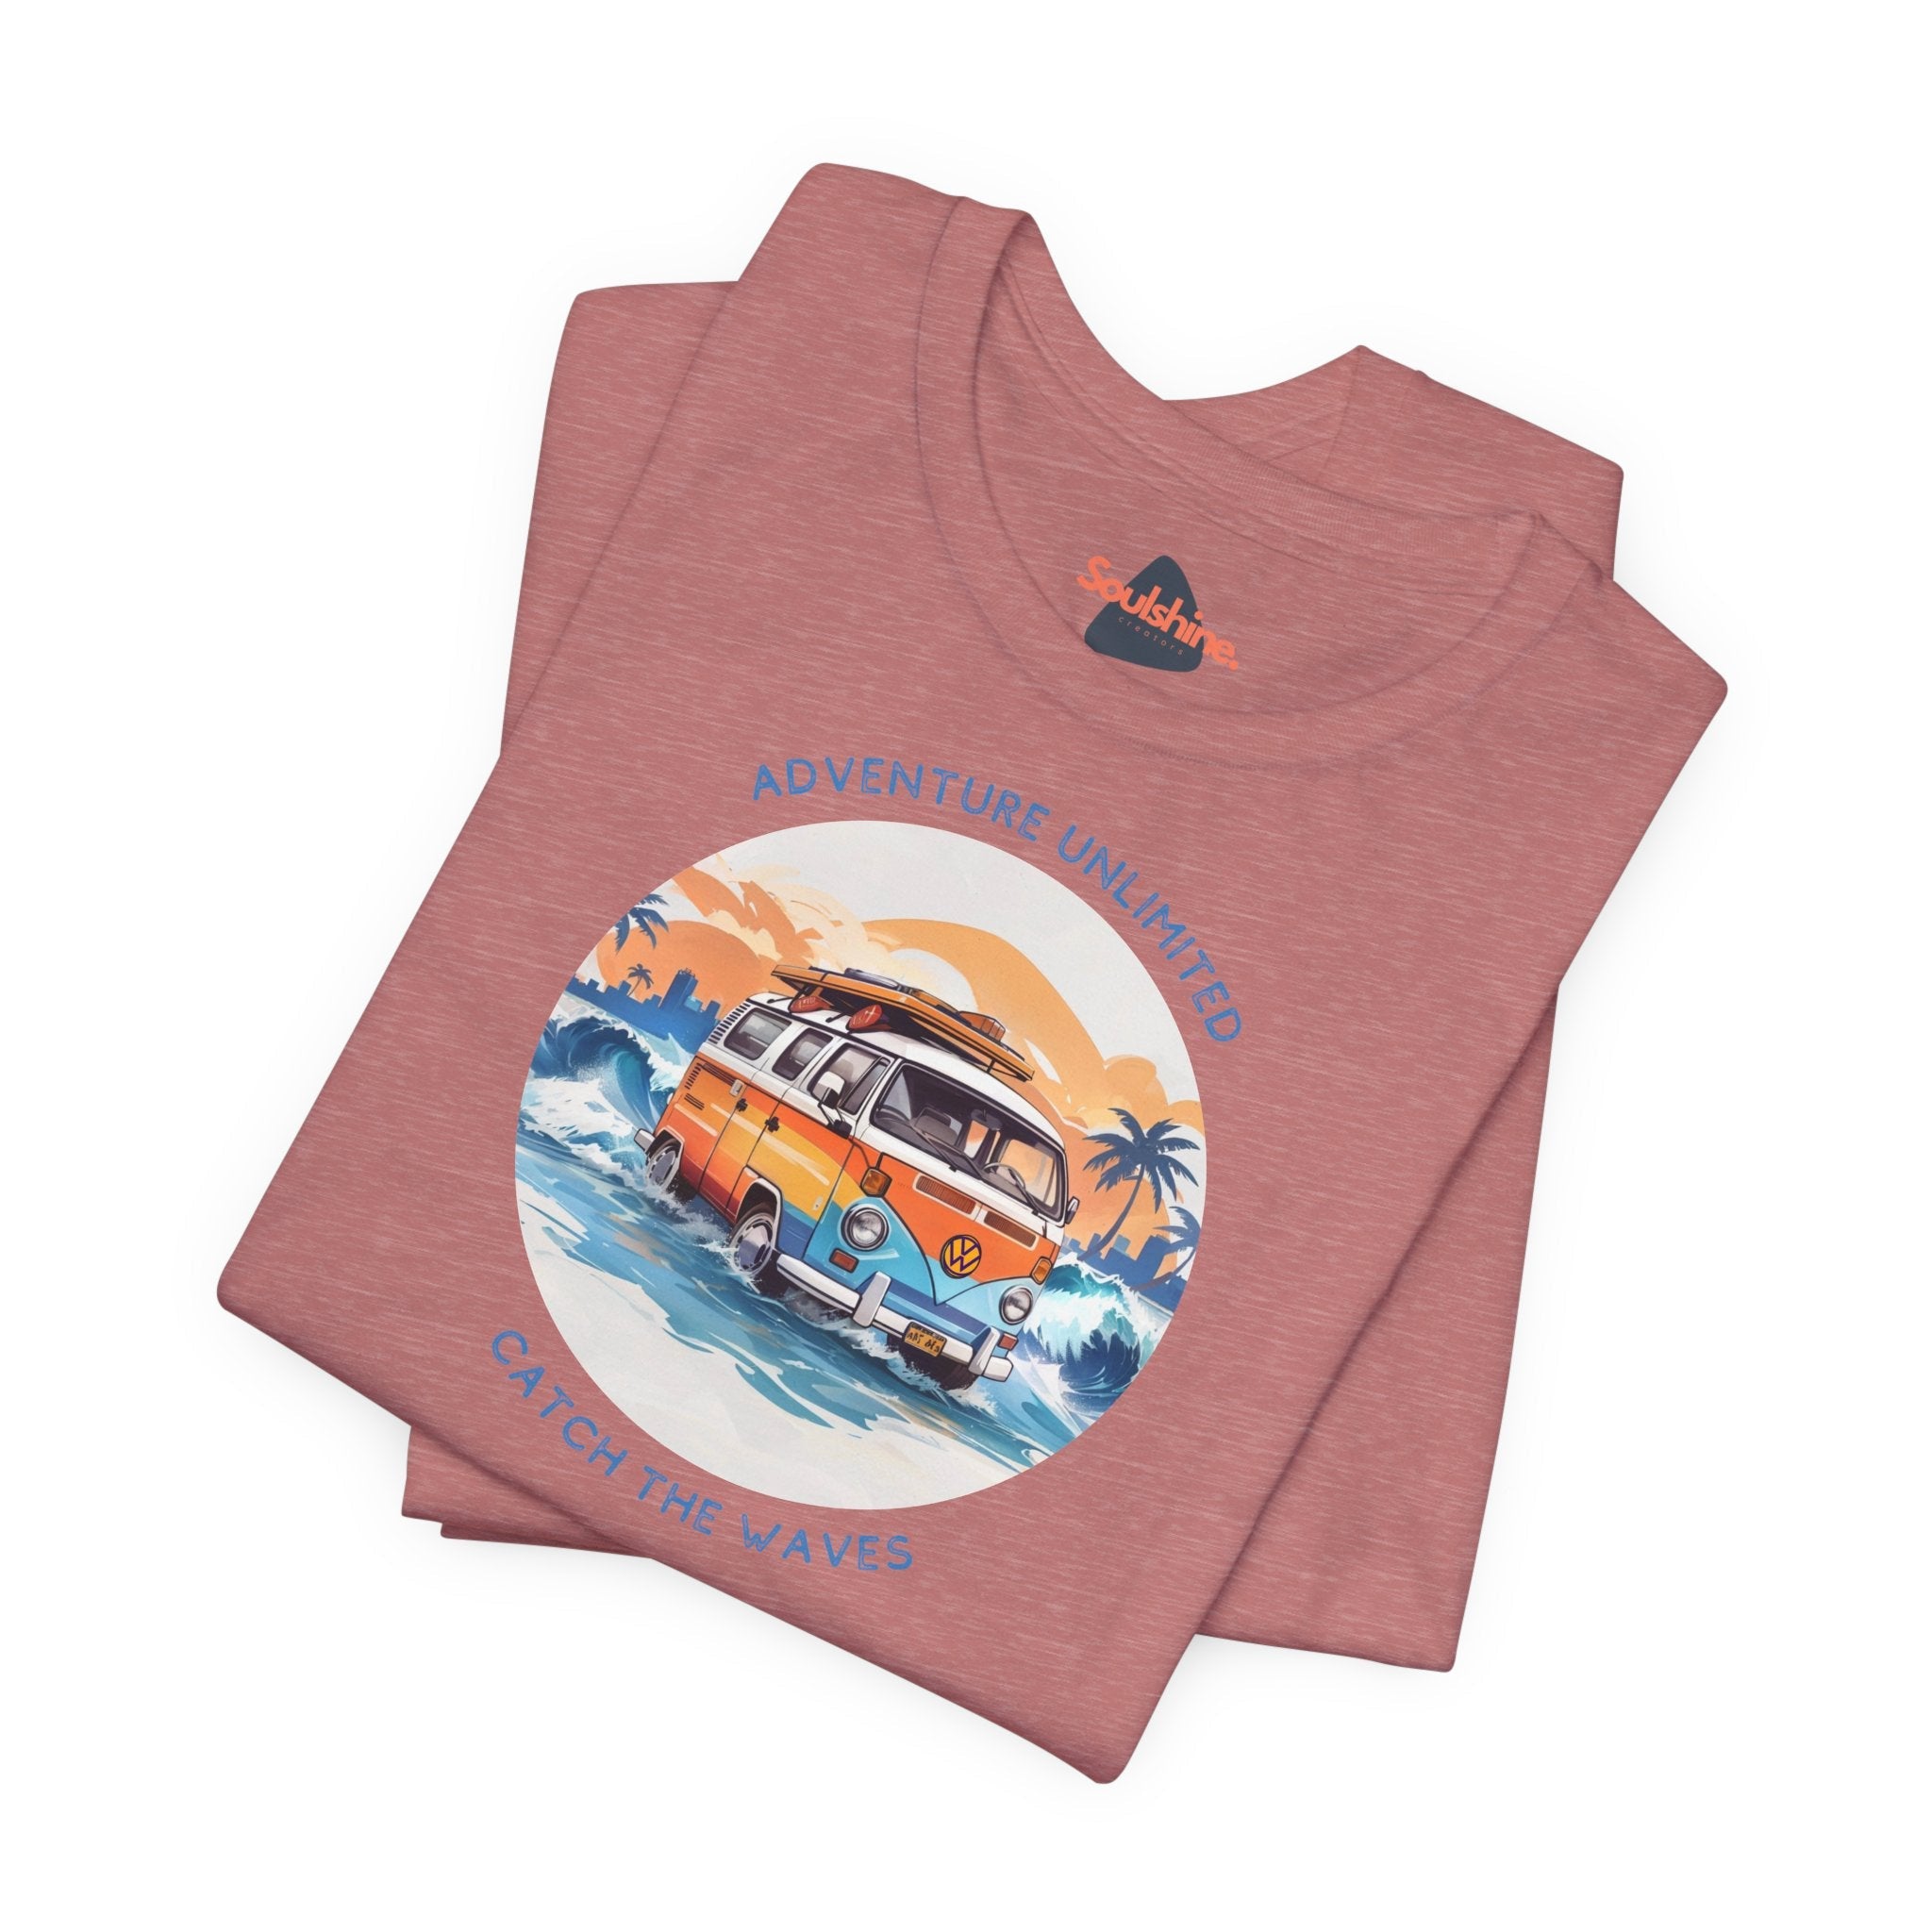 Adventure Unlimited Surfing T-Shirt with Van and Surfboard Design - Direct-to-Garment Printed Item